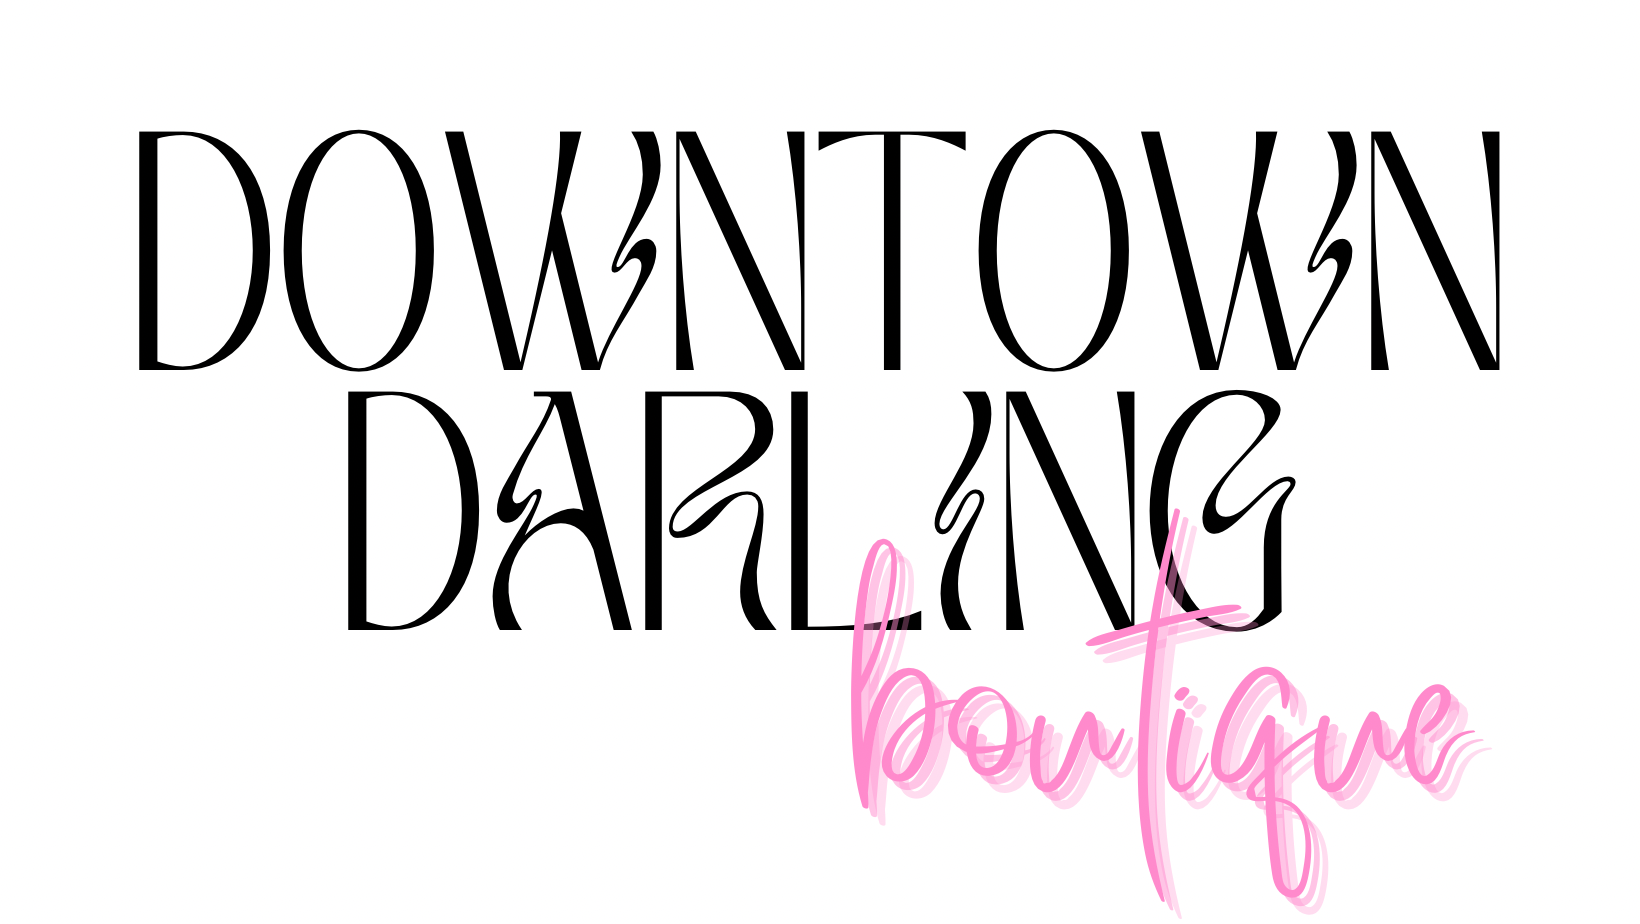 NEW NEW NEW ✨ Need a boujee - Downtown Darling Boutique